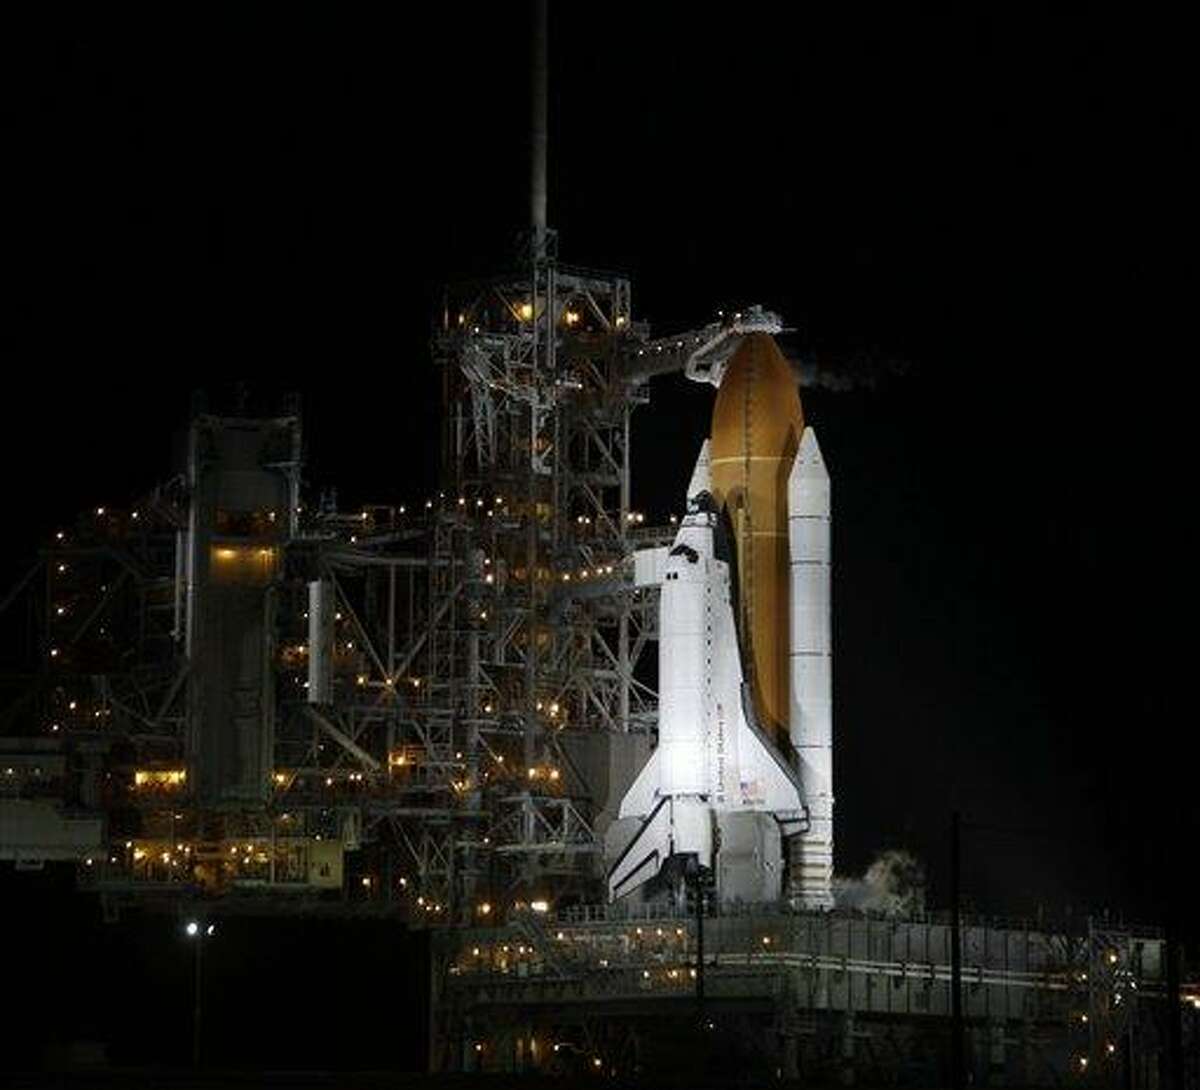 The space shuttle Atlantis is seen on the launch pad at the Kennedy Space Center Friday, July 8, 2011, in Cape Canaveral, Fla. Atlantis is scheduled to take off Friday and is the 135th and final space shuttle launch for NASA. (AP Photo/John Raoux)